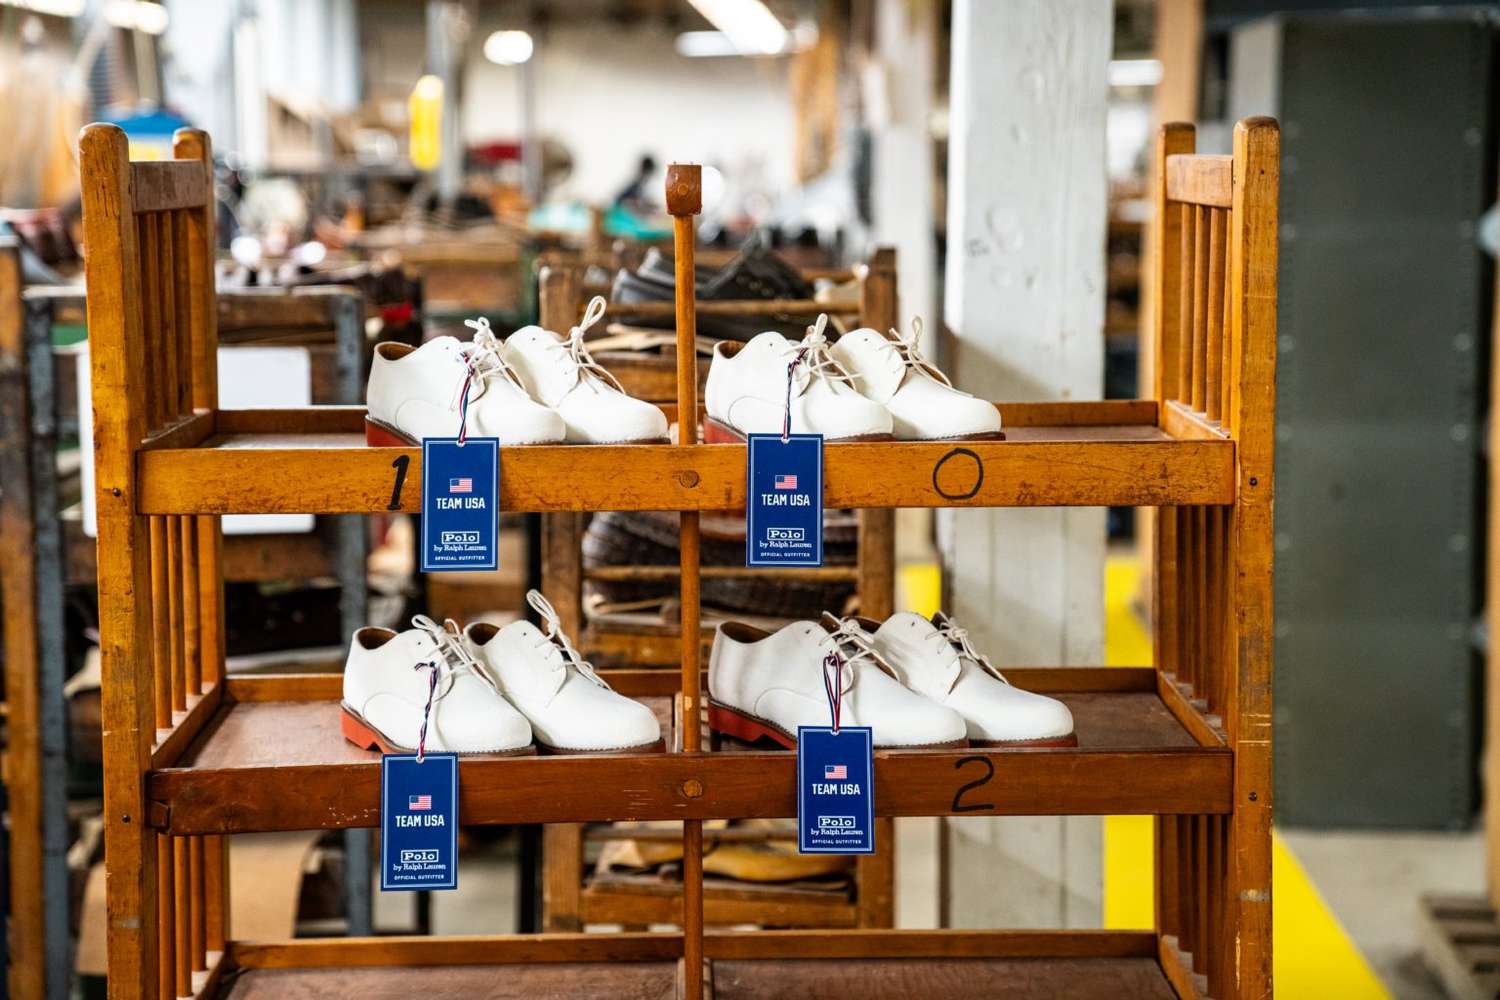 Maine’s Rancourt & Co. worked with Ralph Lauren to manufacture the shoes that will be worn by Team USA during the opening and closing ceremonies of the summer Olympics, which are set to be held in Paris.